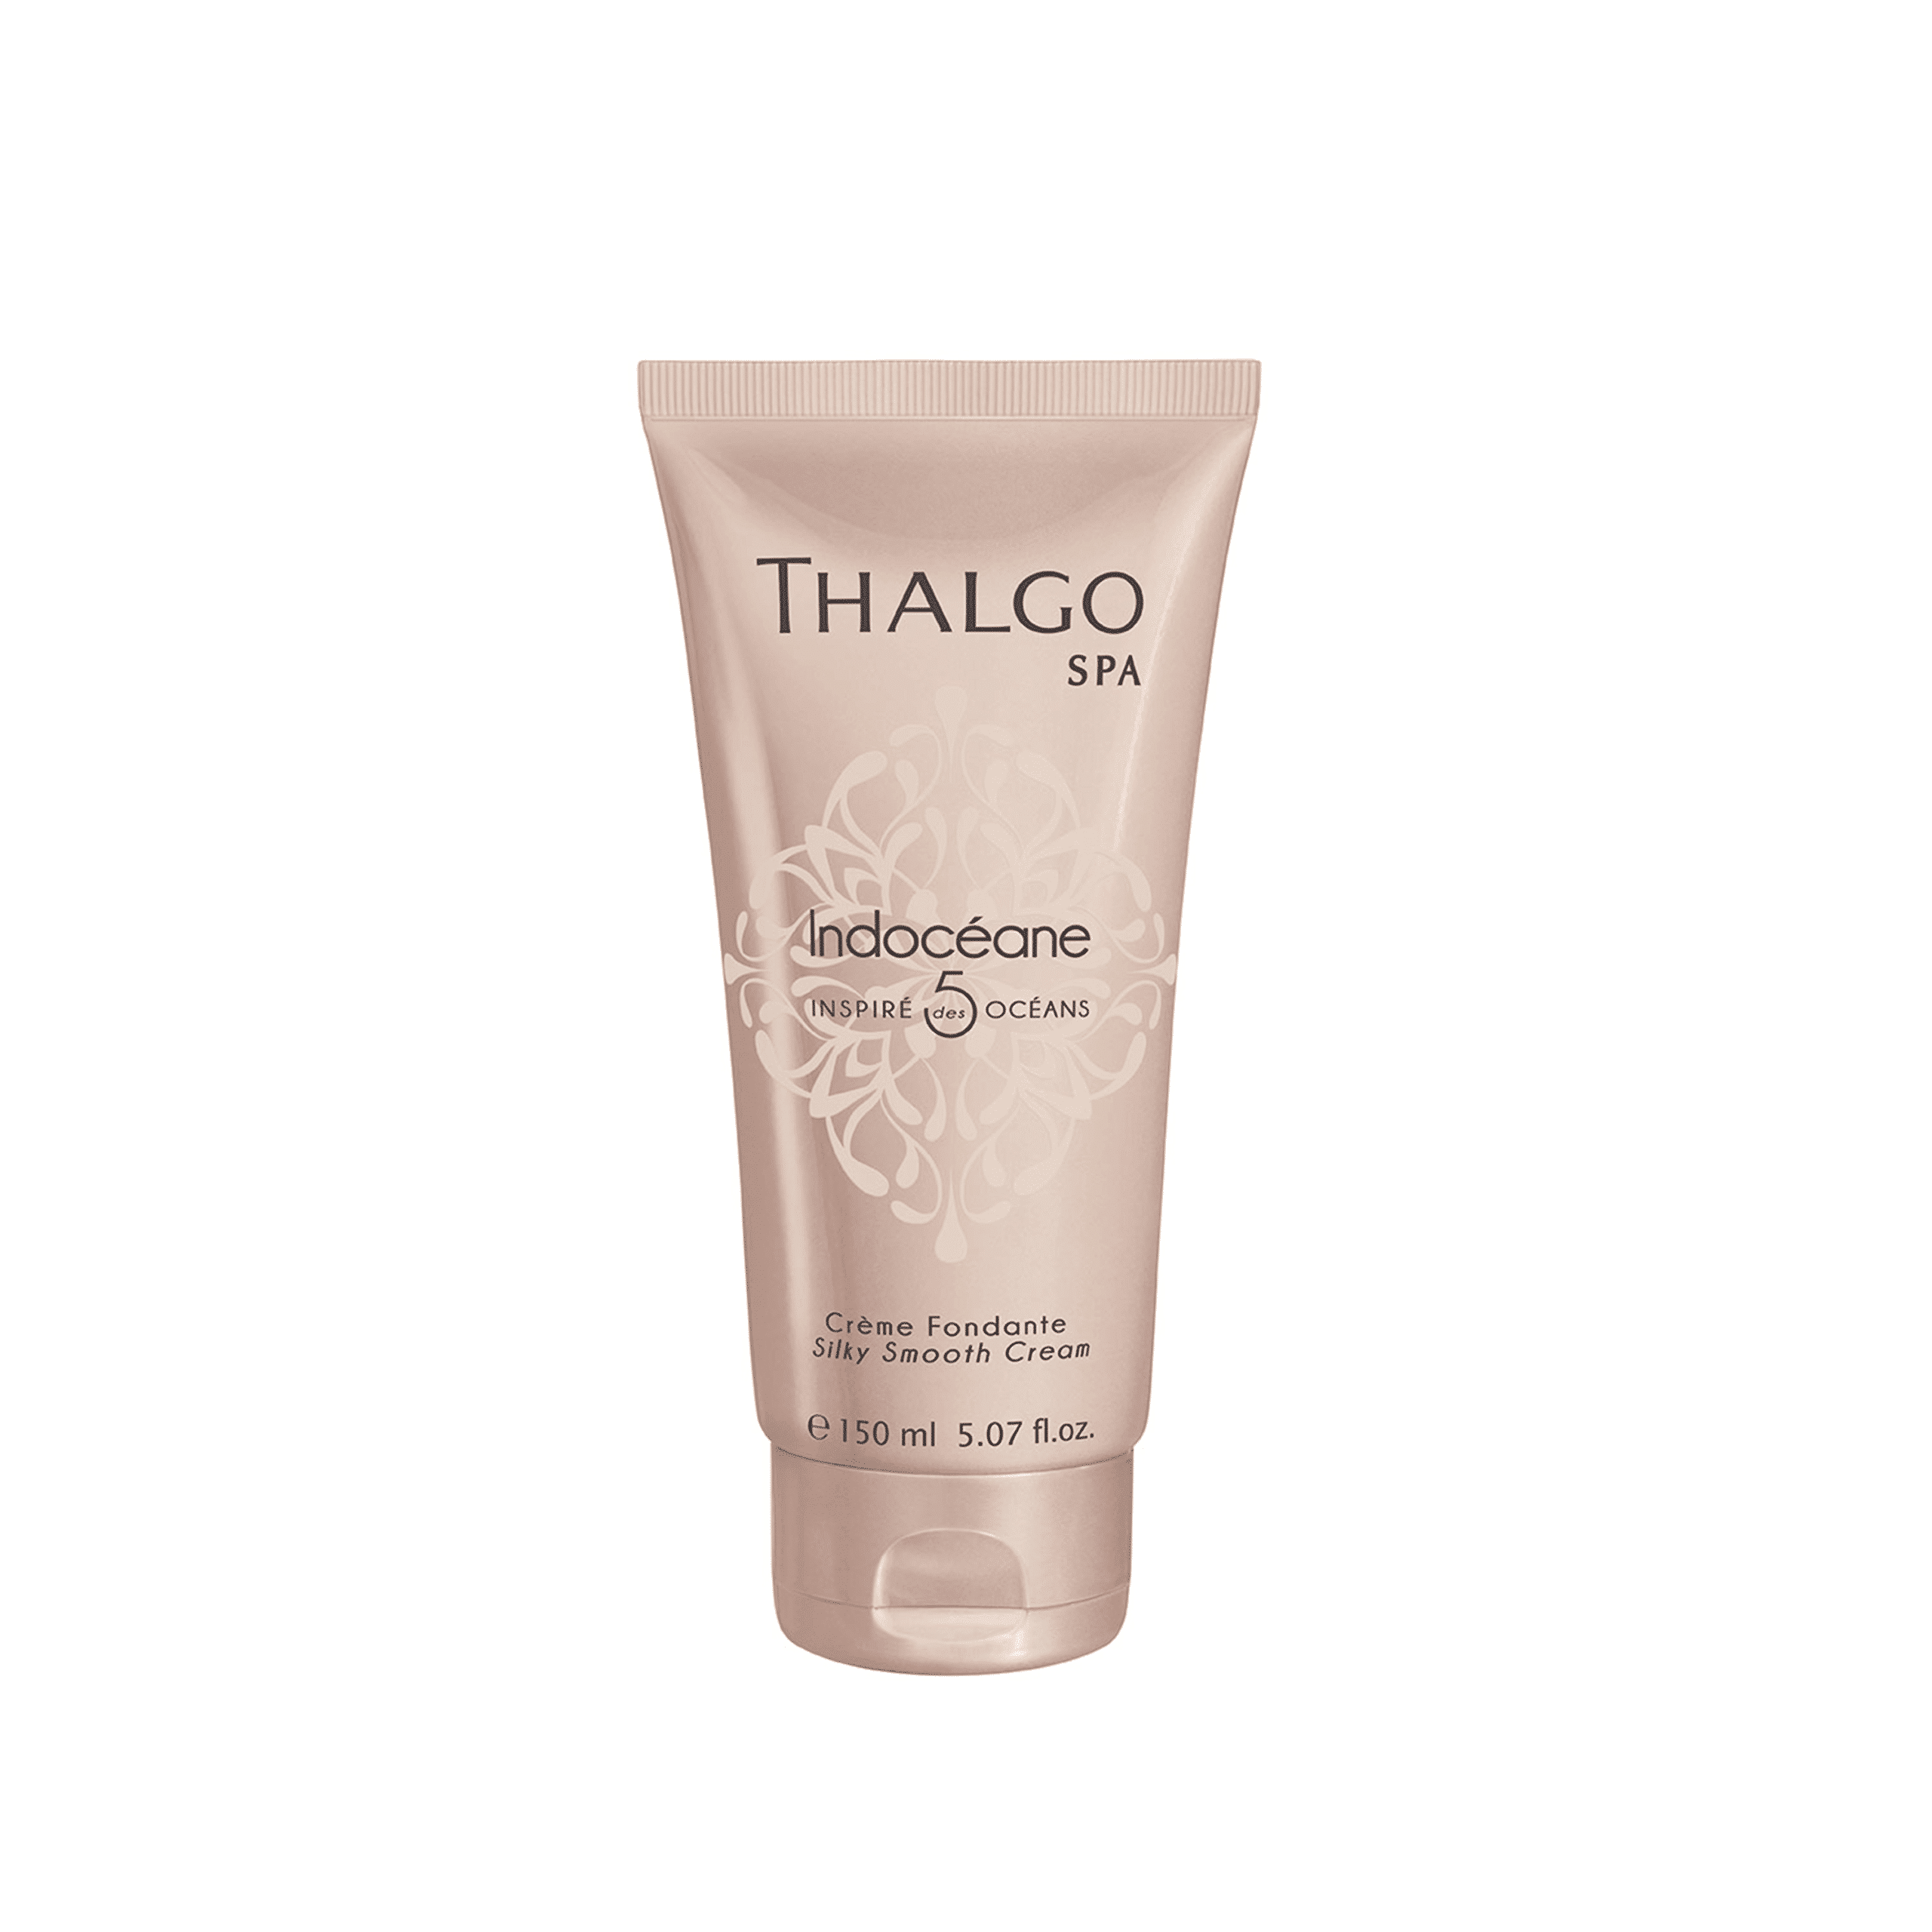 Thalgo Spa Line Indoceane Silky Smooth Cream 150ml - Luxurious skincare cream for silky smooth skin